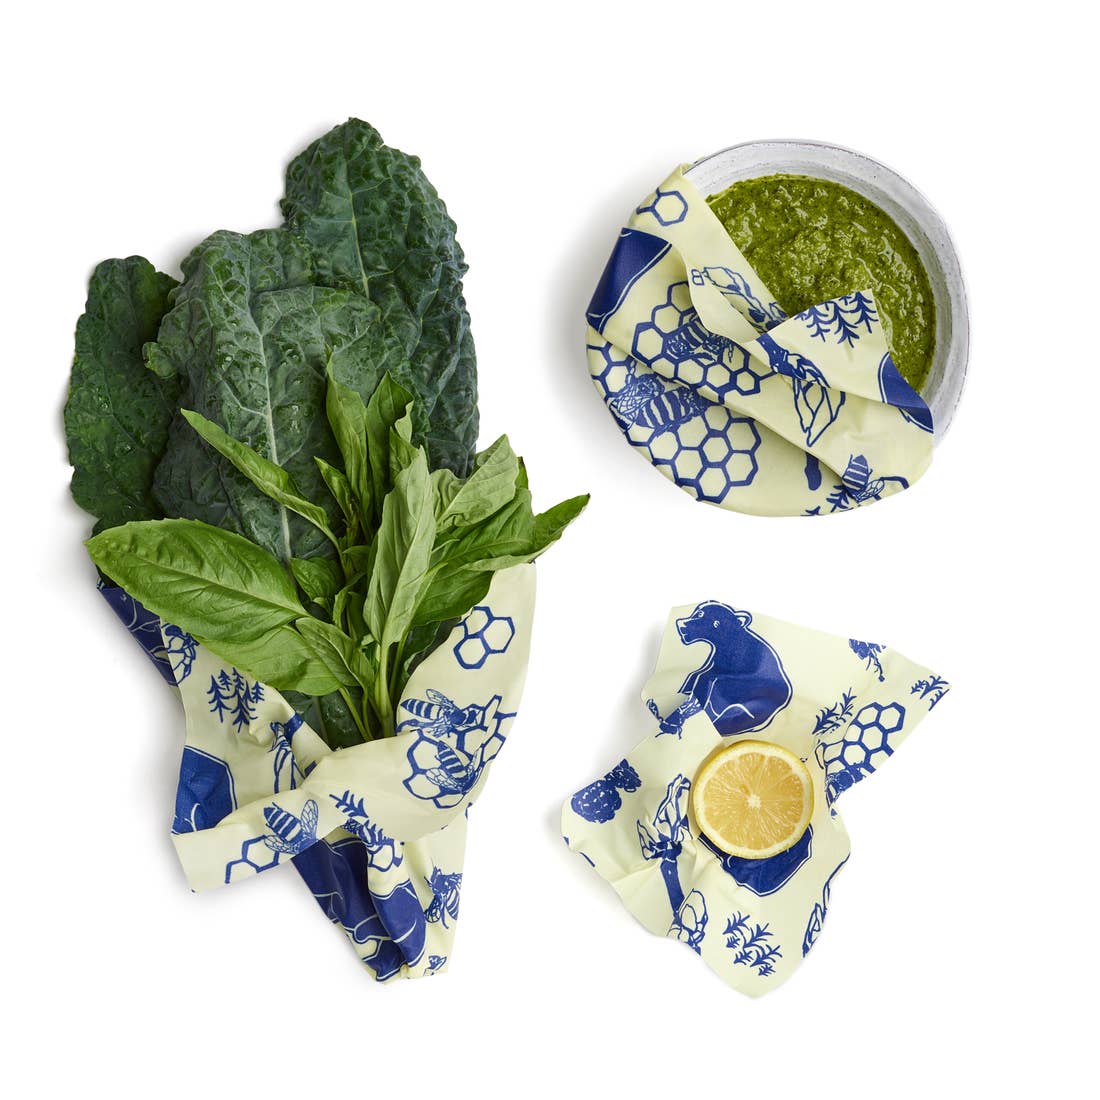 Beeswax Wrap Hexagon Bowl Covers 3-Pack